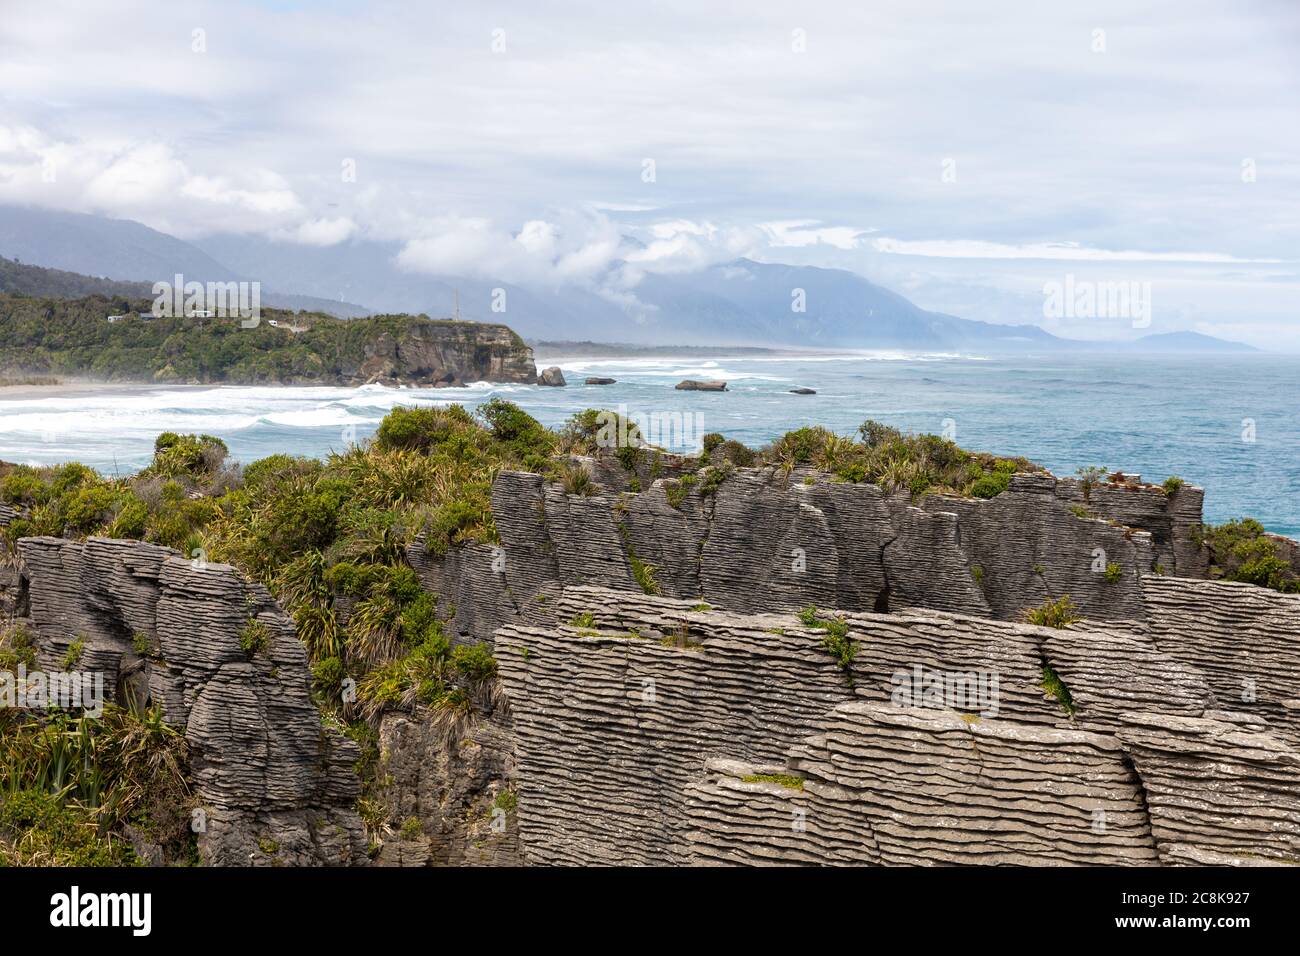 The famous Pancake Rocks on Dolomite Point with a view out over the sea towards mountains covered in clouds. Dolomite Point, South Island, New Zealand Stock Photo